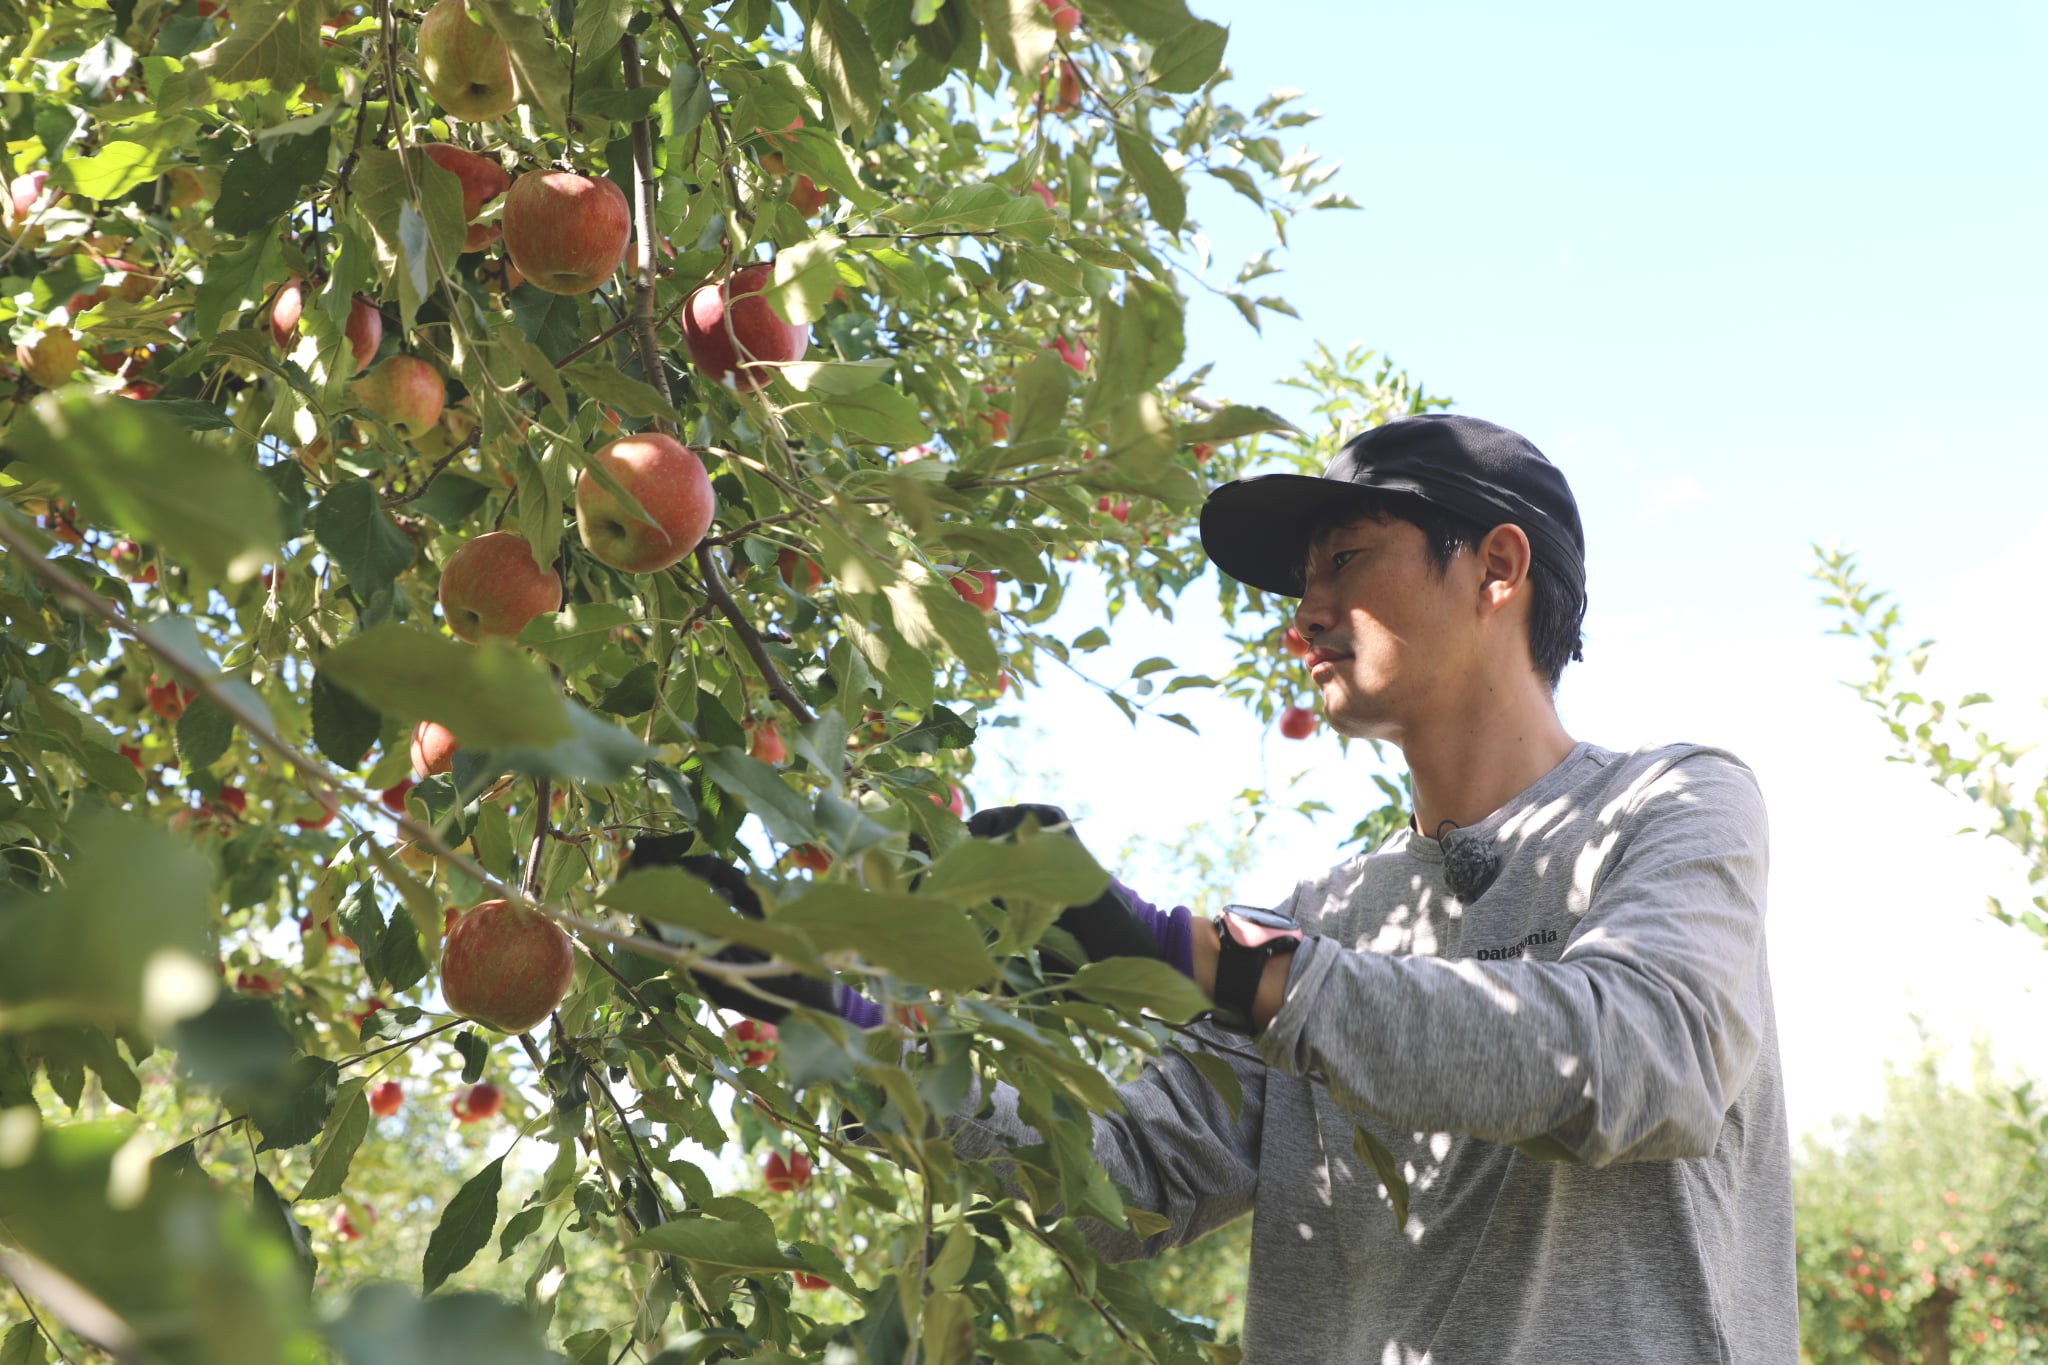 A young man harvesting Ichida persimmons, a specialty of Nagano Prefecture